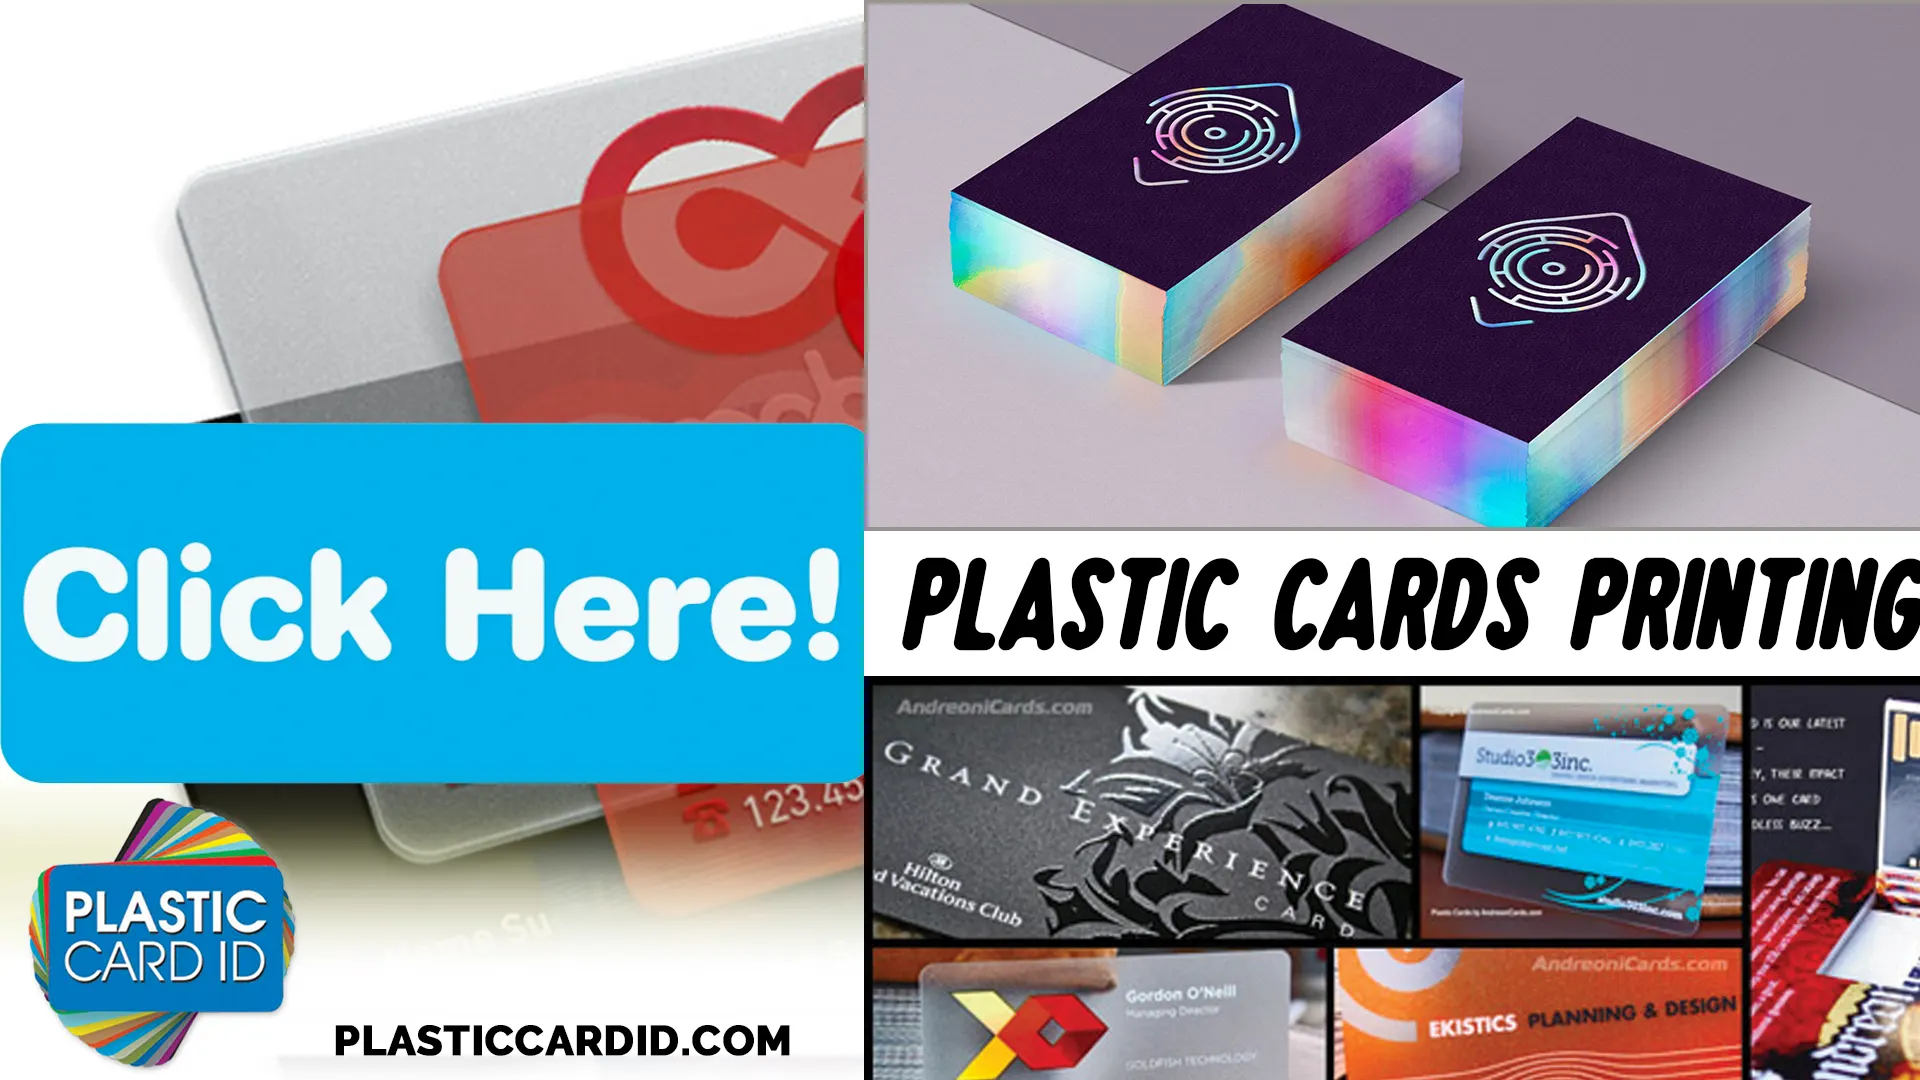 Welcome to High-Volume Excellence in Litho Printing for Plastic Cards